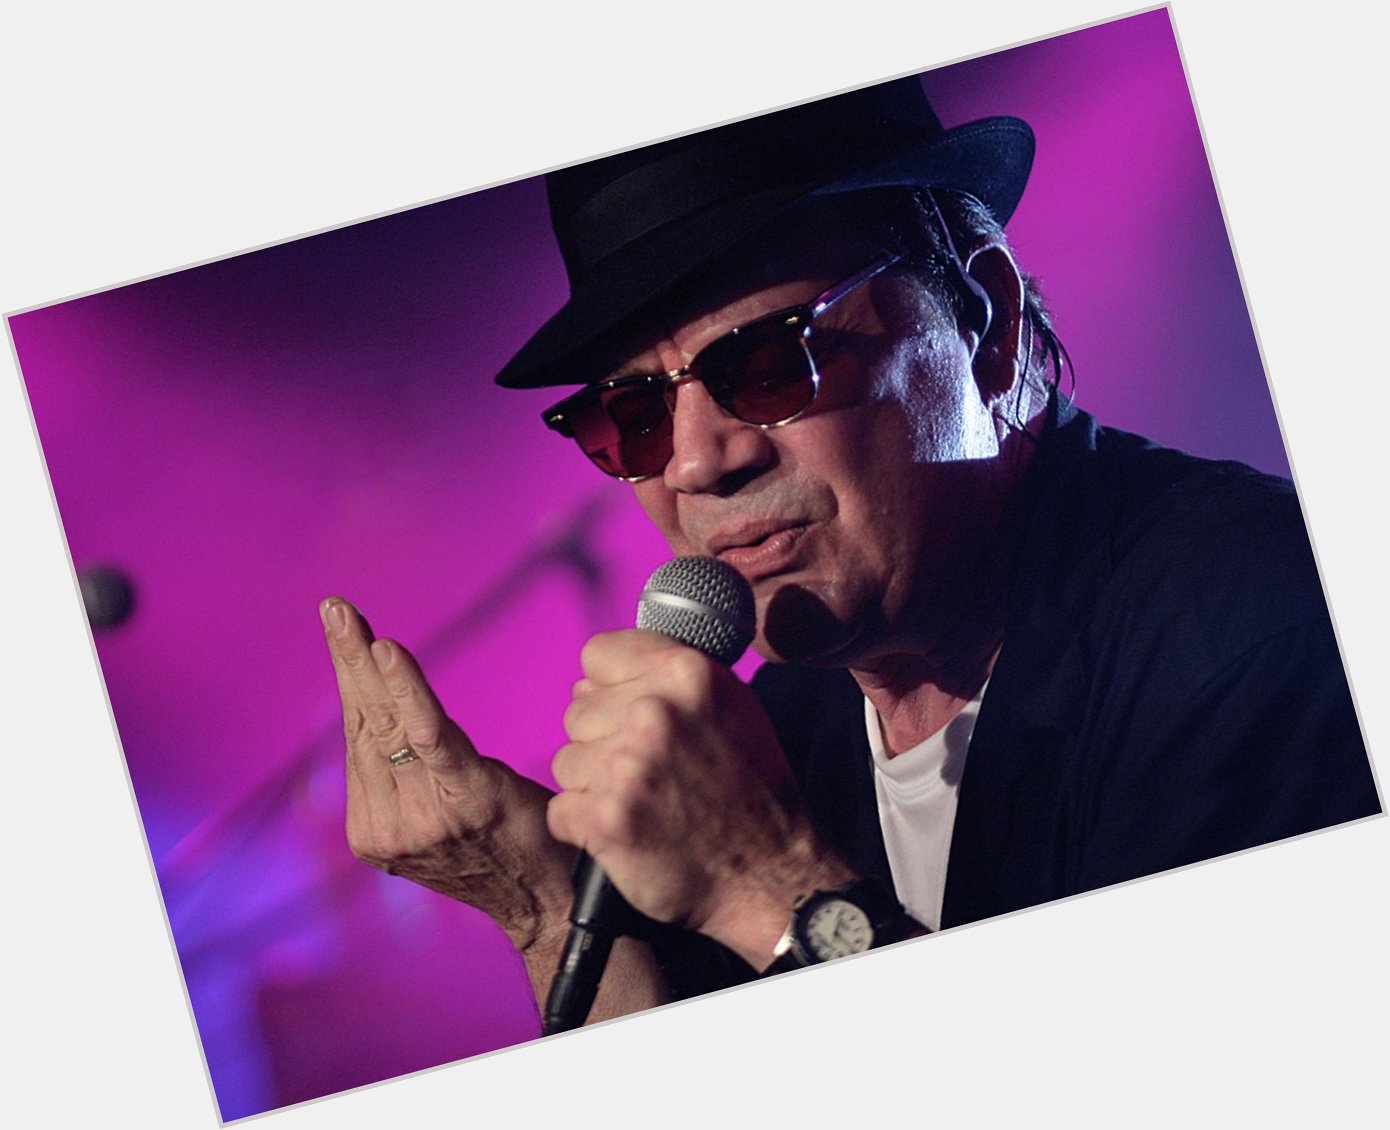  Also in the department of underrated classic rockers, happy birthday to Mitch Ryder today :-) 